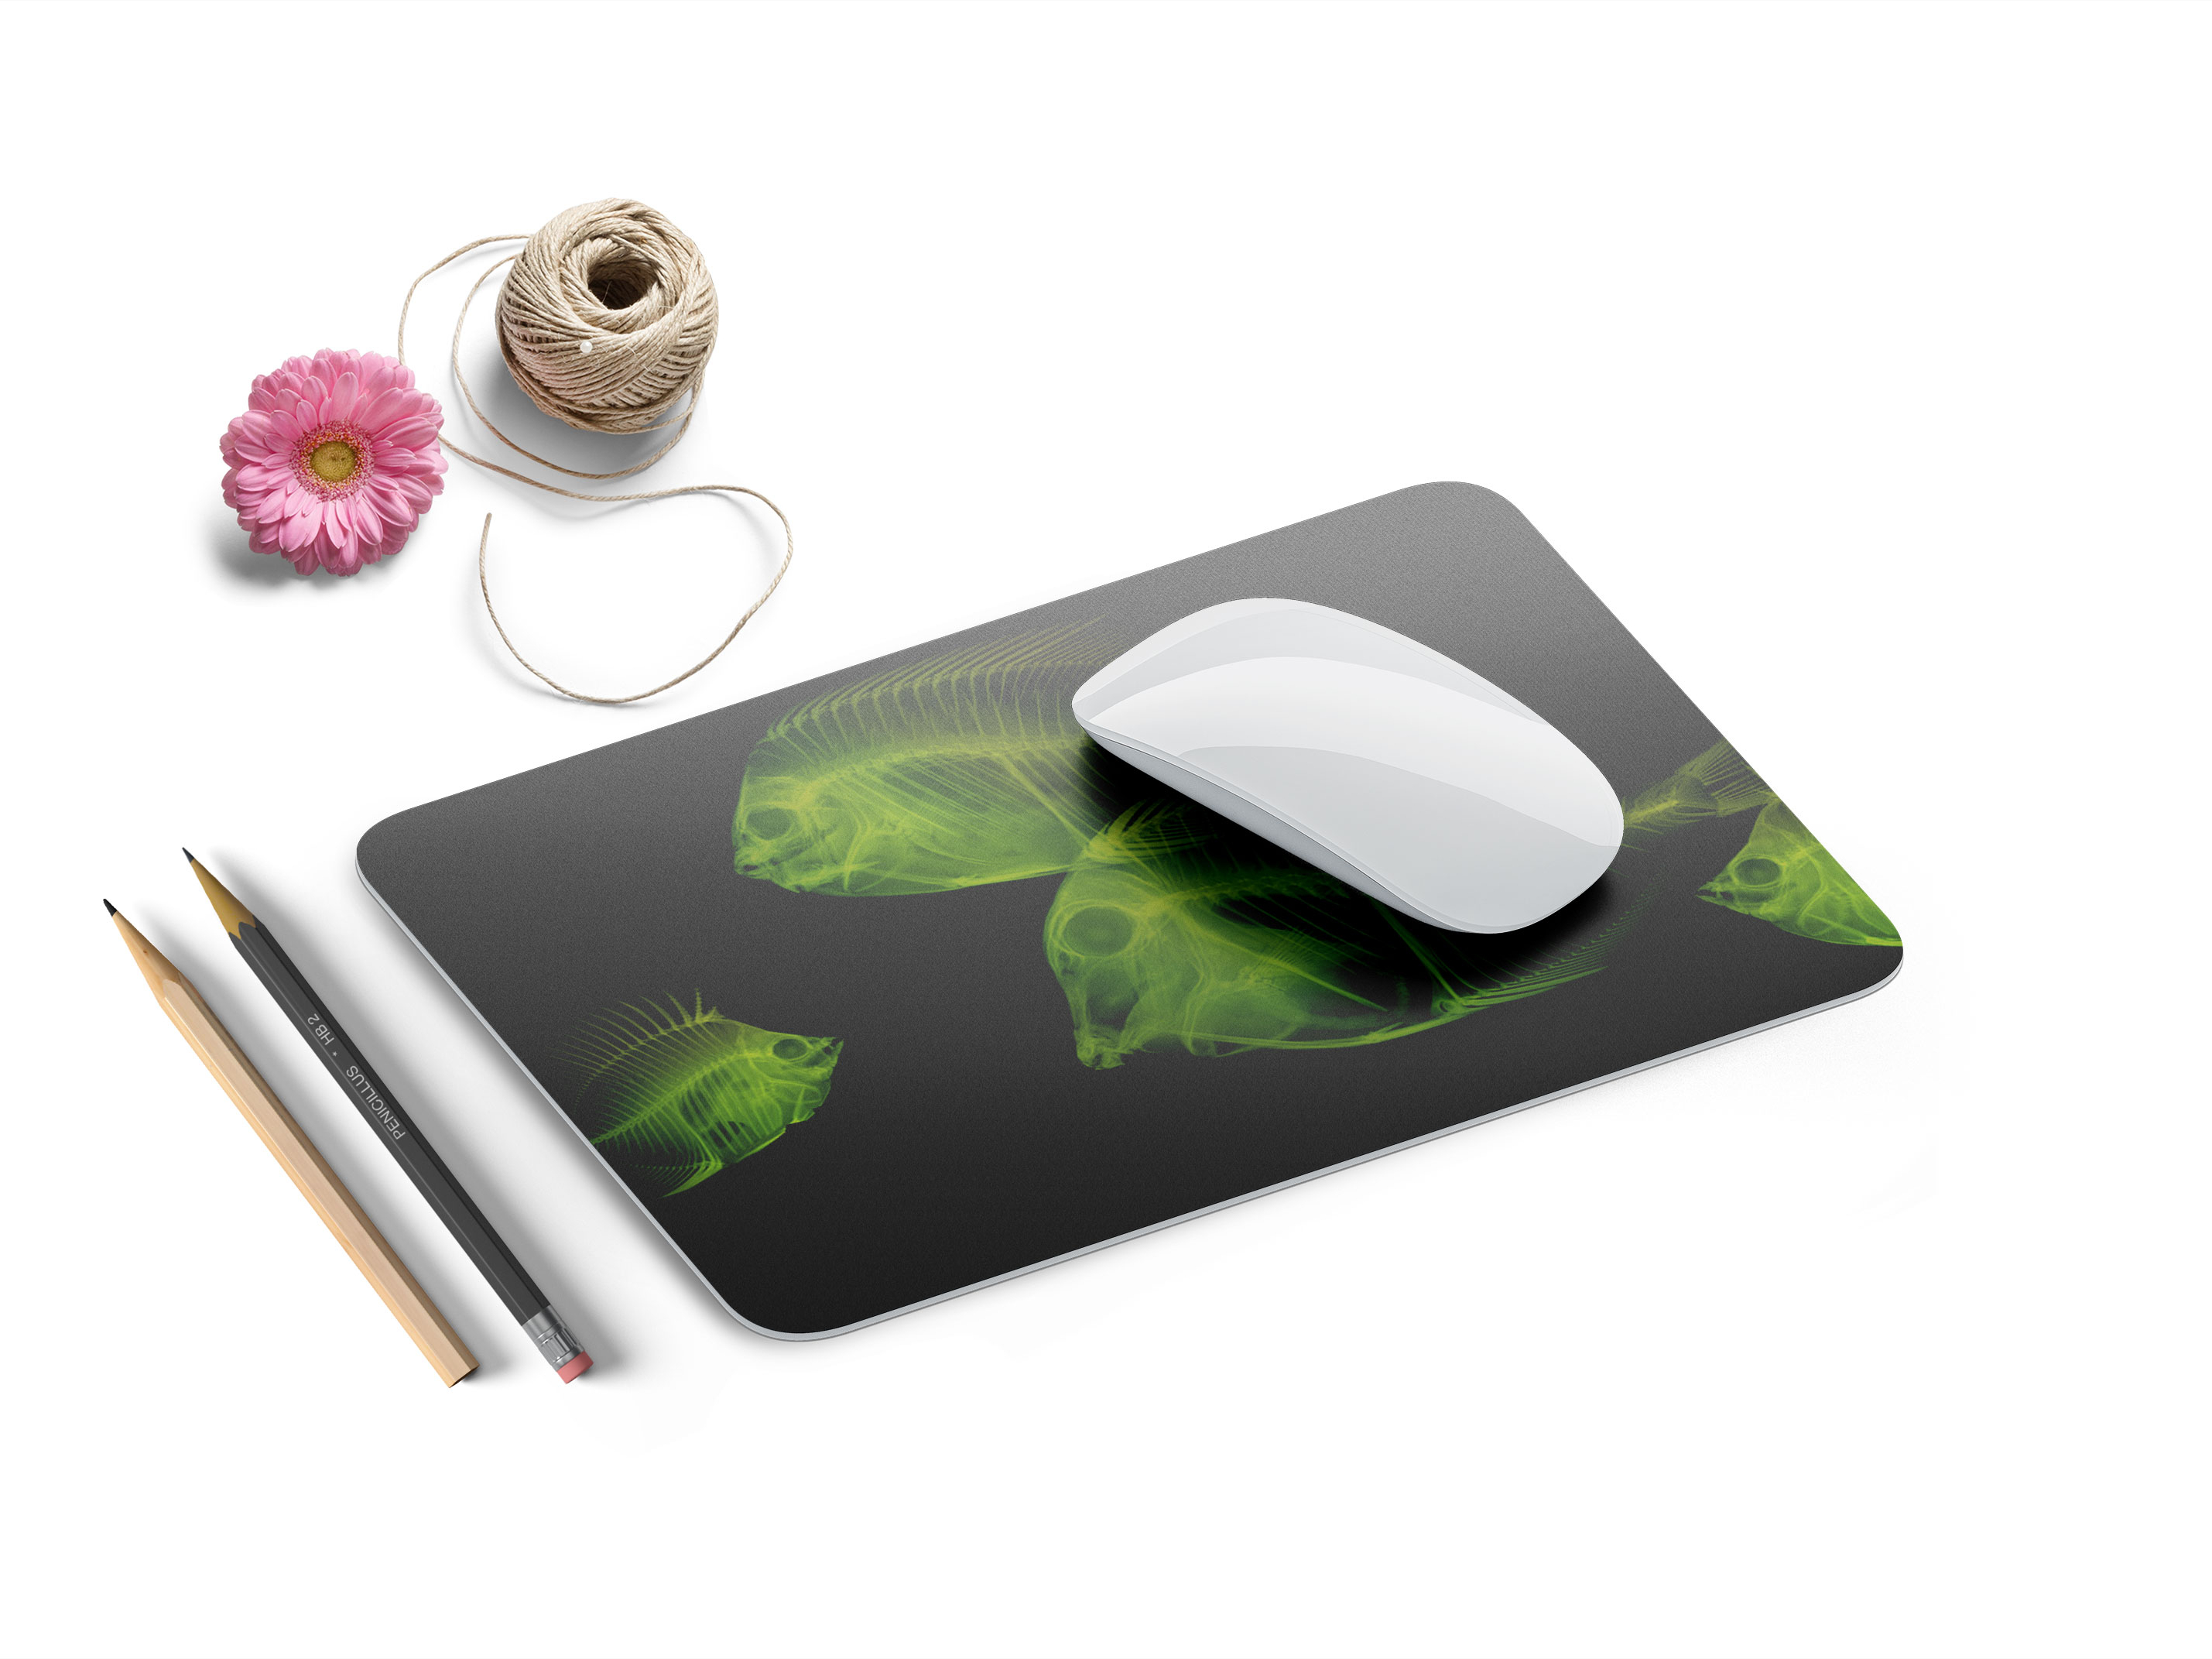 Download Free Unique Mouse Pad Mockup by Arun Kumar on Dribbble